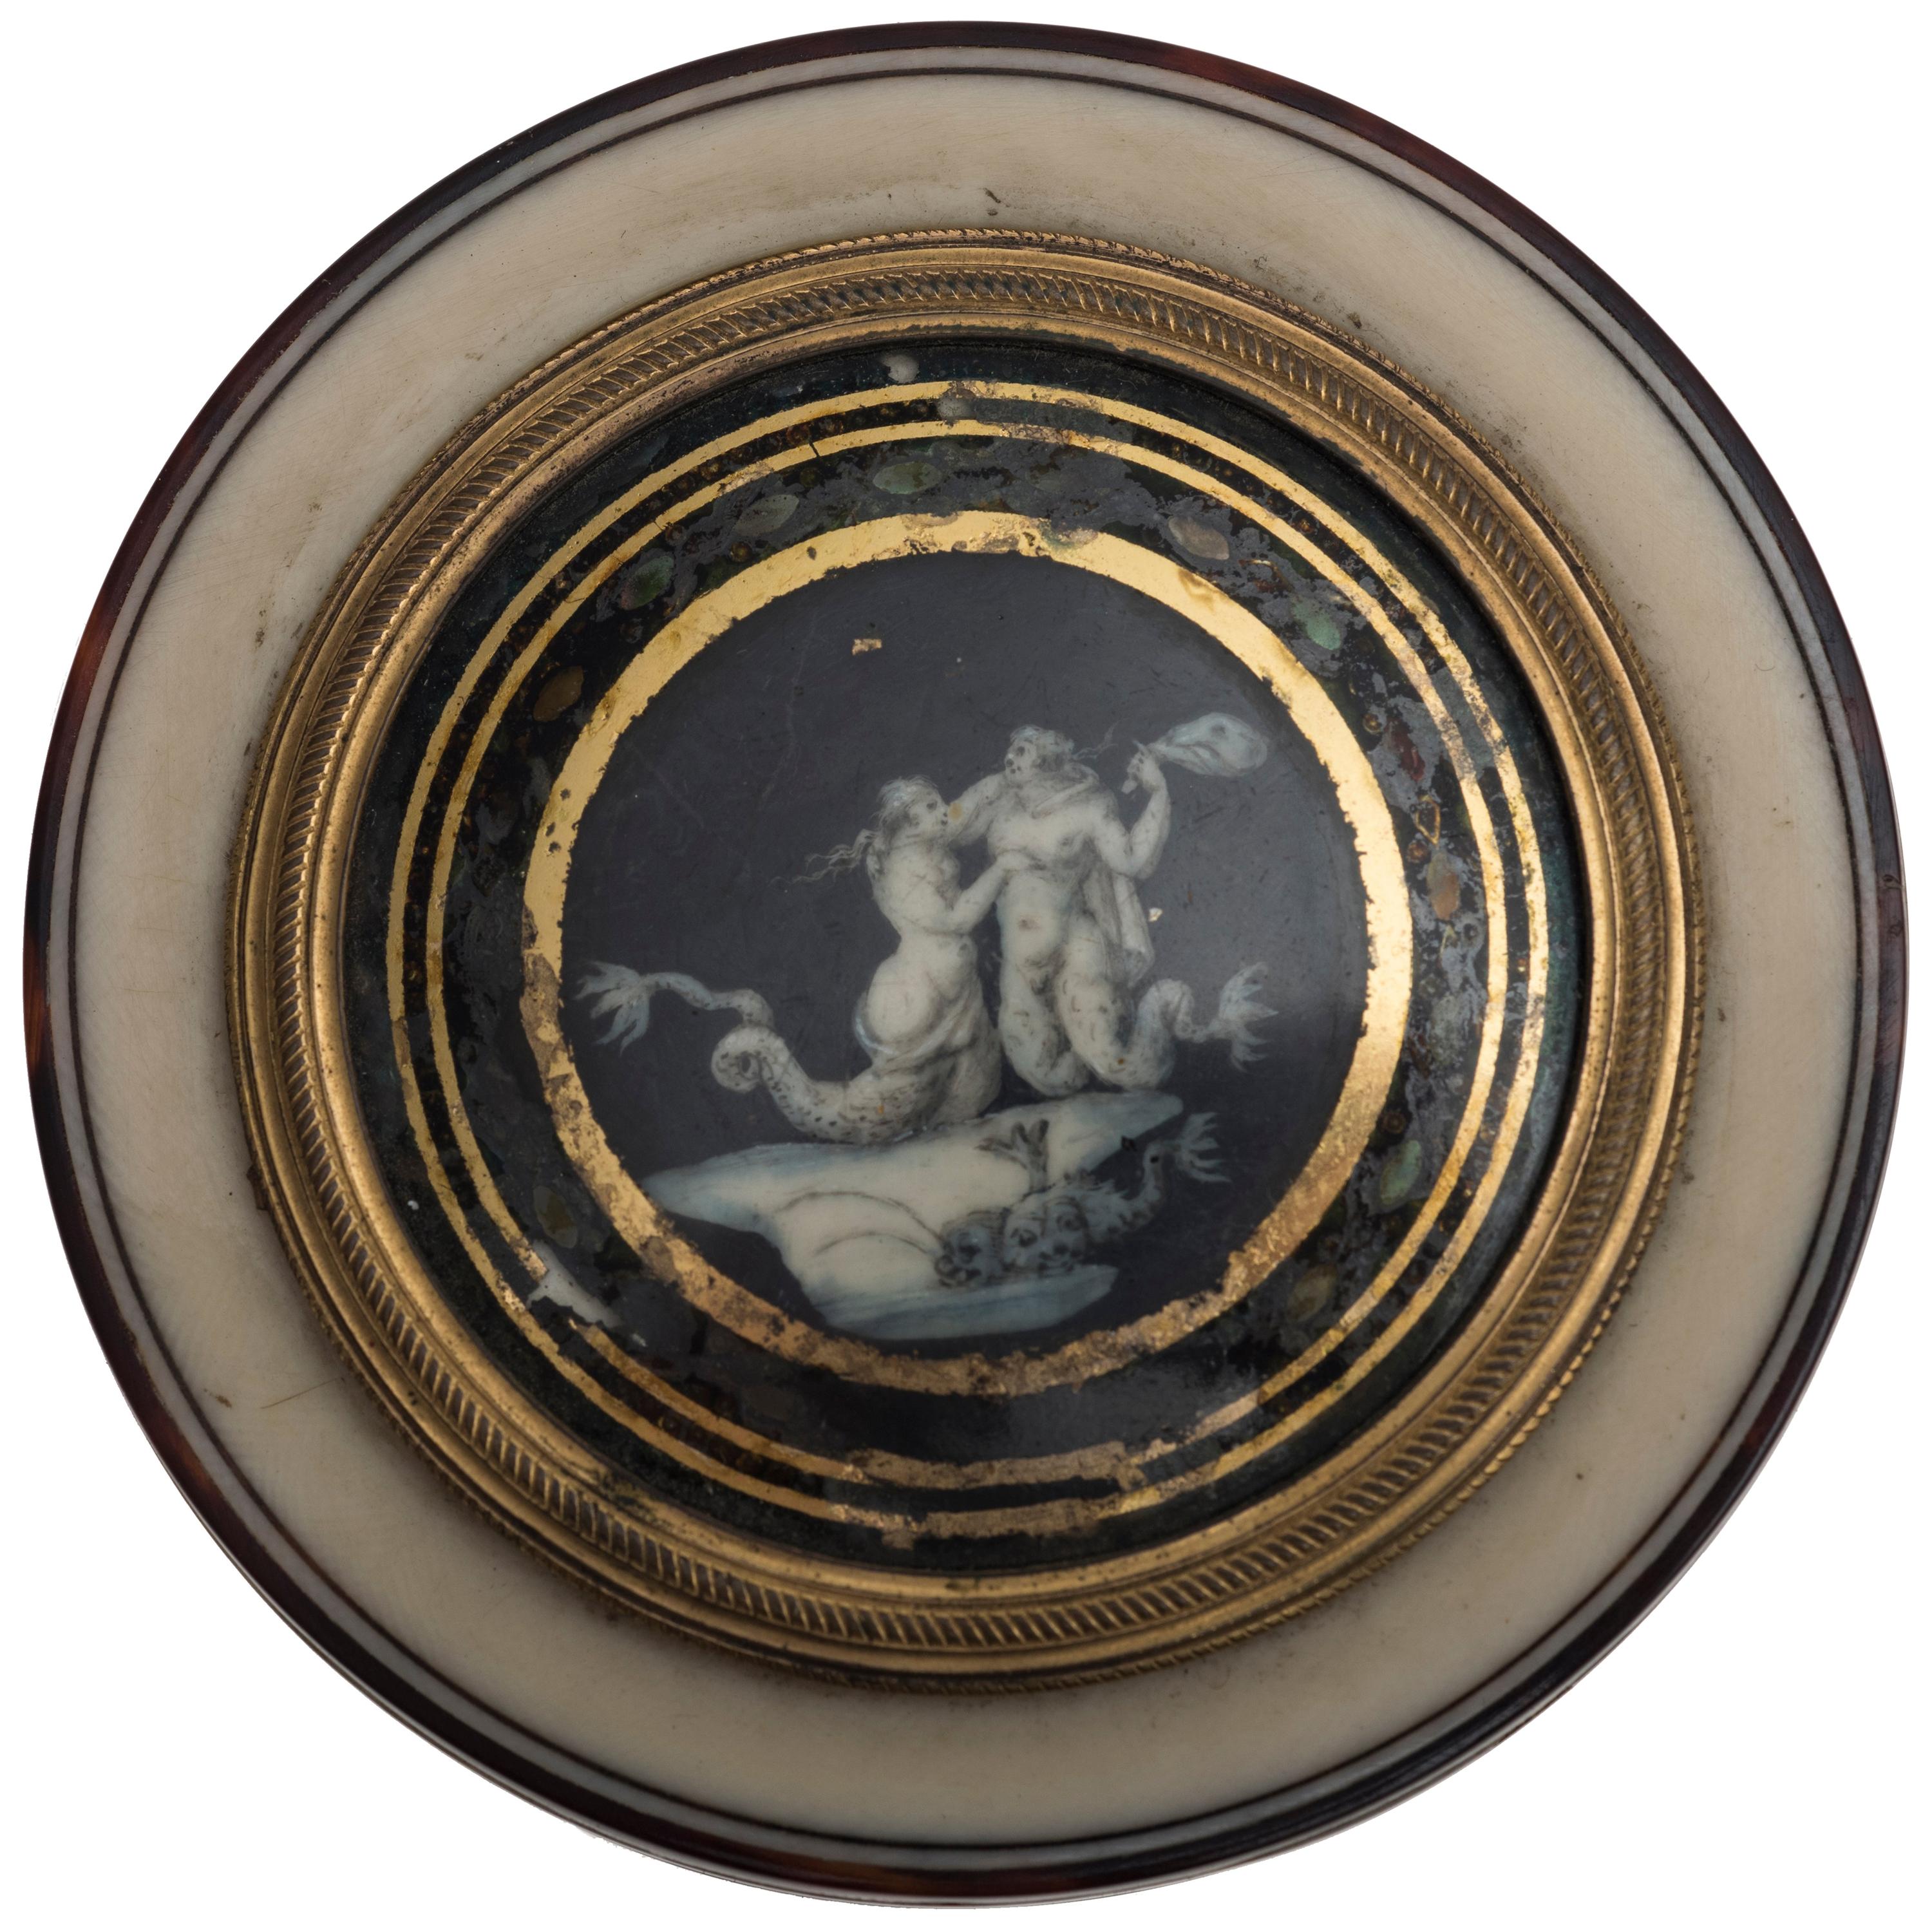 Ancient Round Box in Bone, Turtle and Gold with Mythological Scene, circa 1805